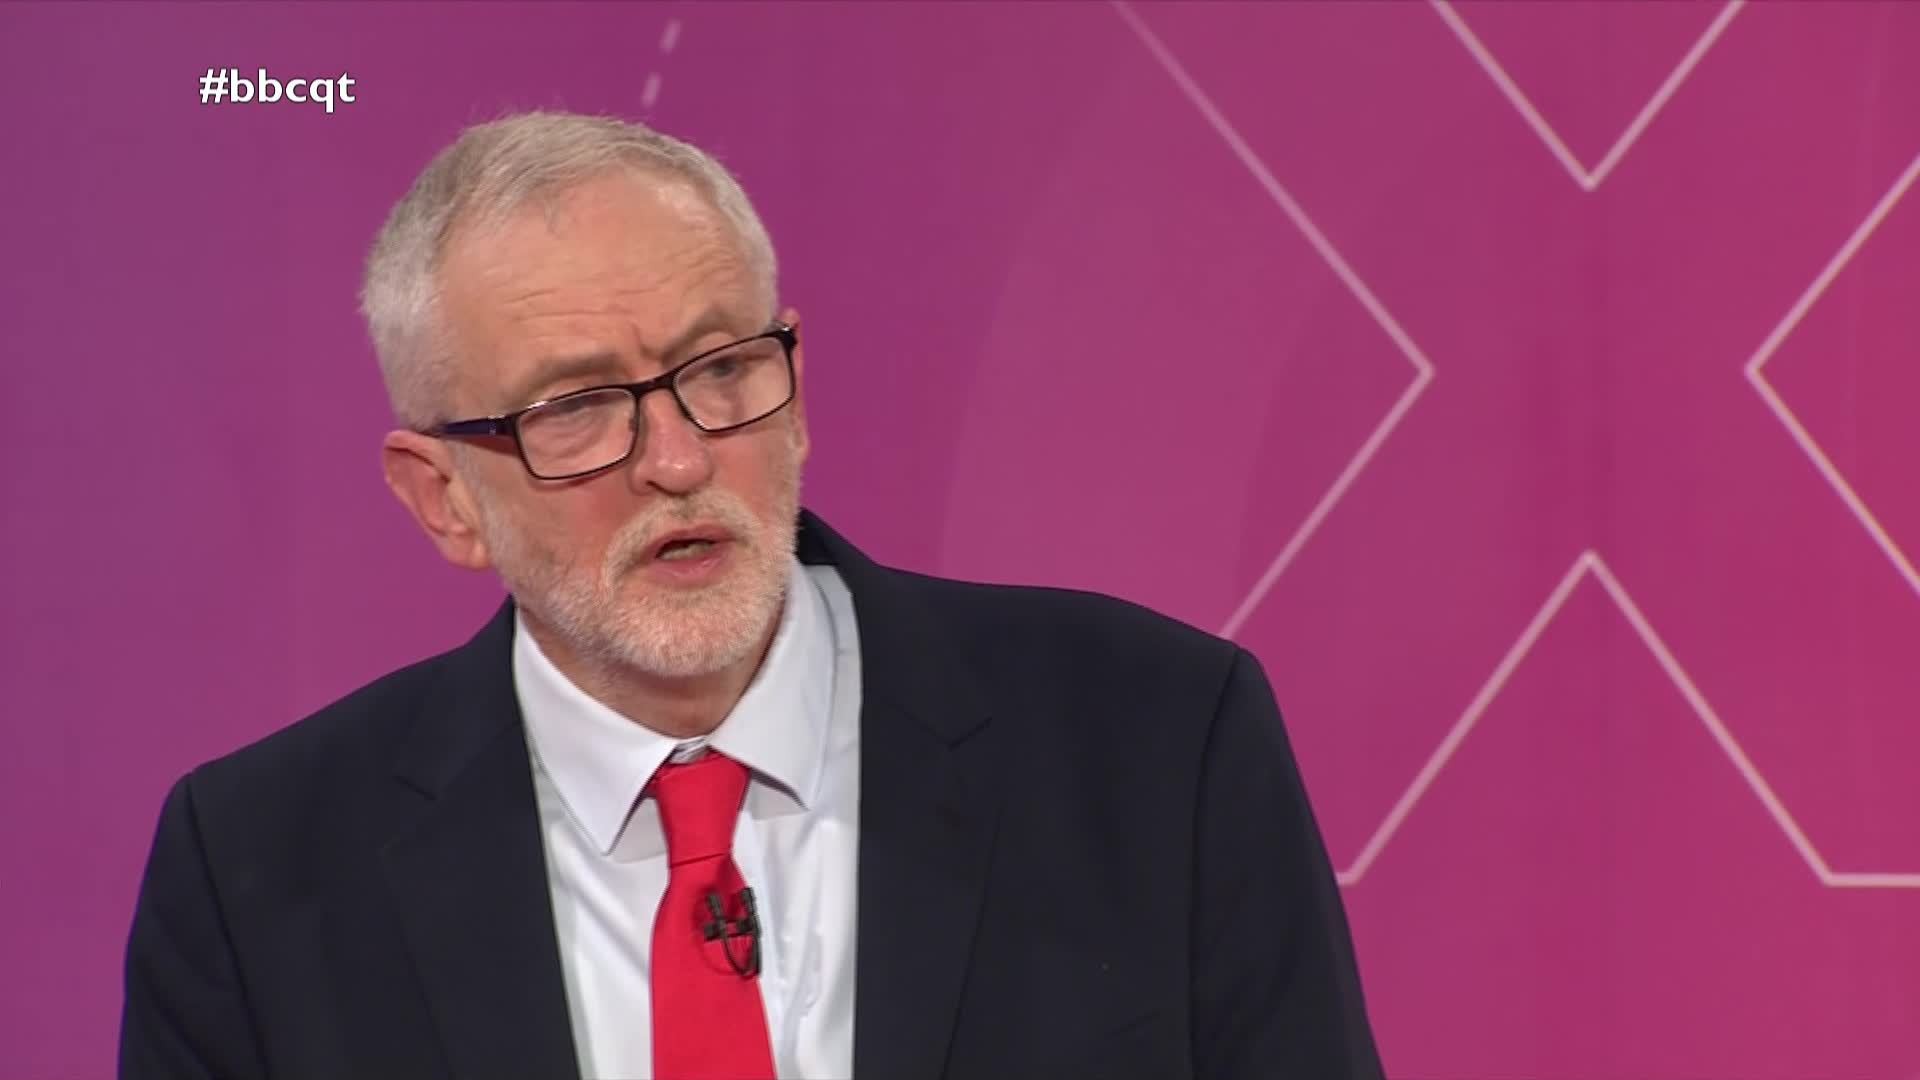 Jeremy Corbyn was laughed at when he claimed he would remain neutral during any future Brexit referendum